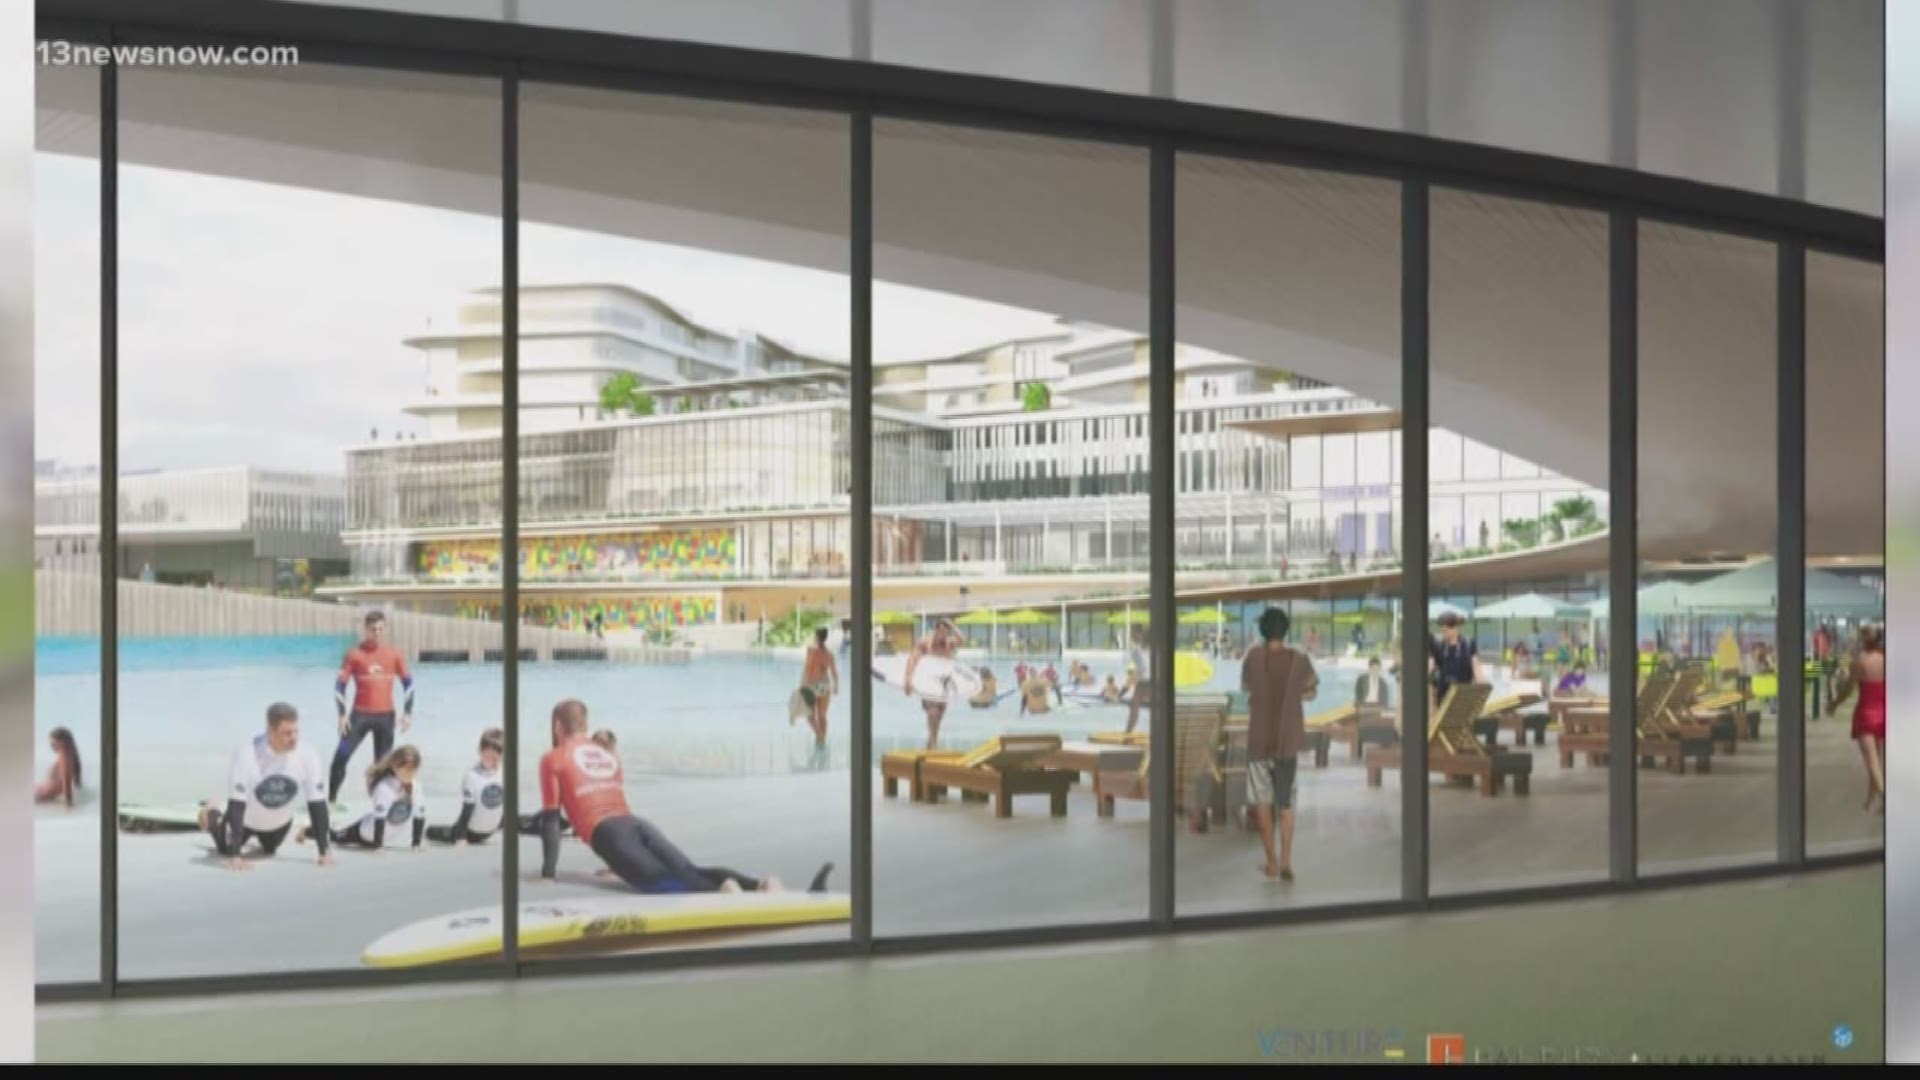 We're getting a new look at a surf park coming to the Virginia Beach Oceanfront.